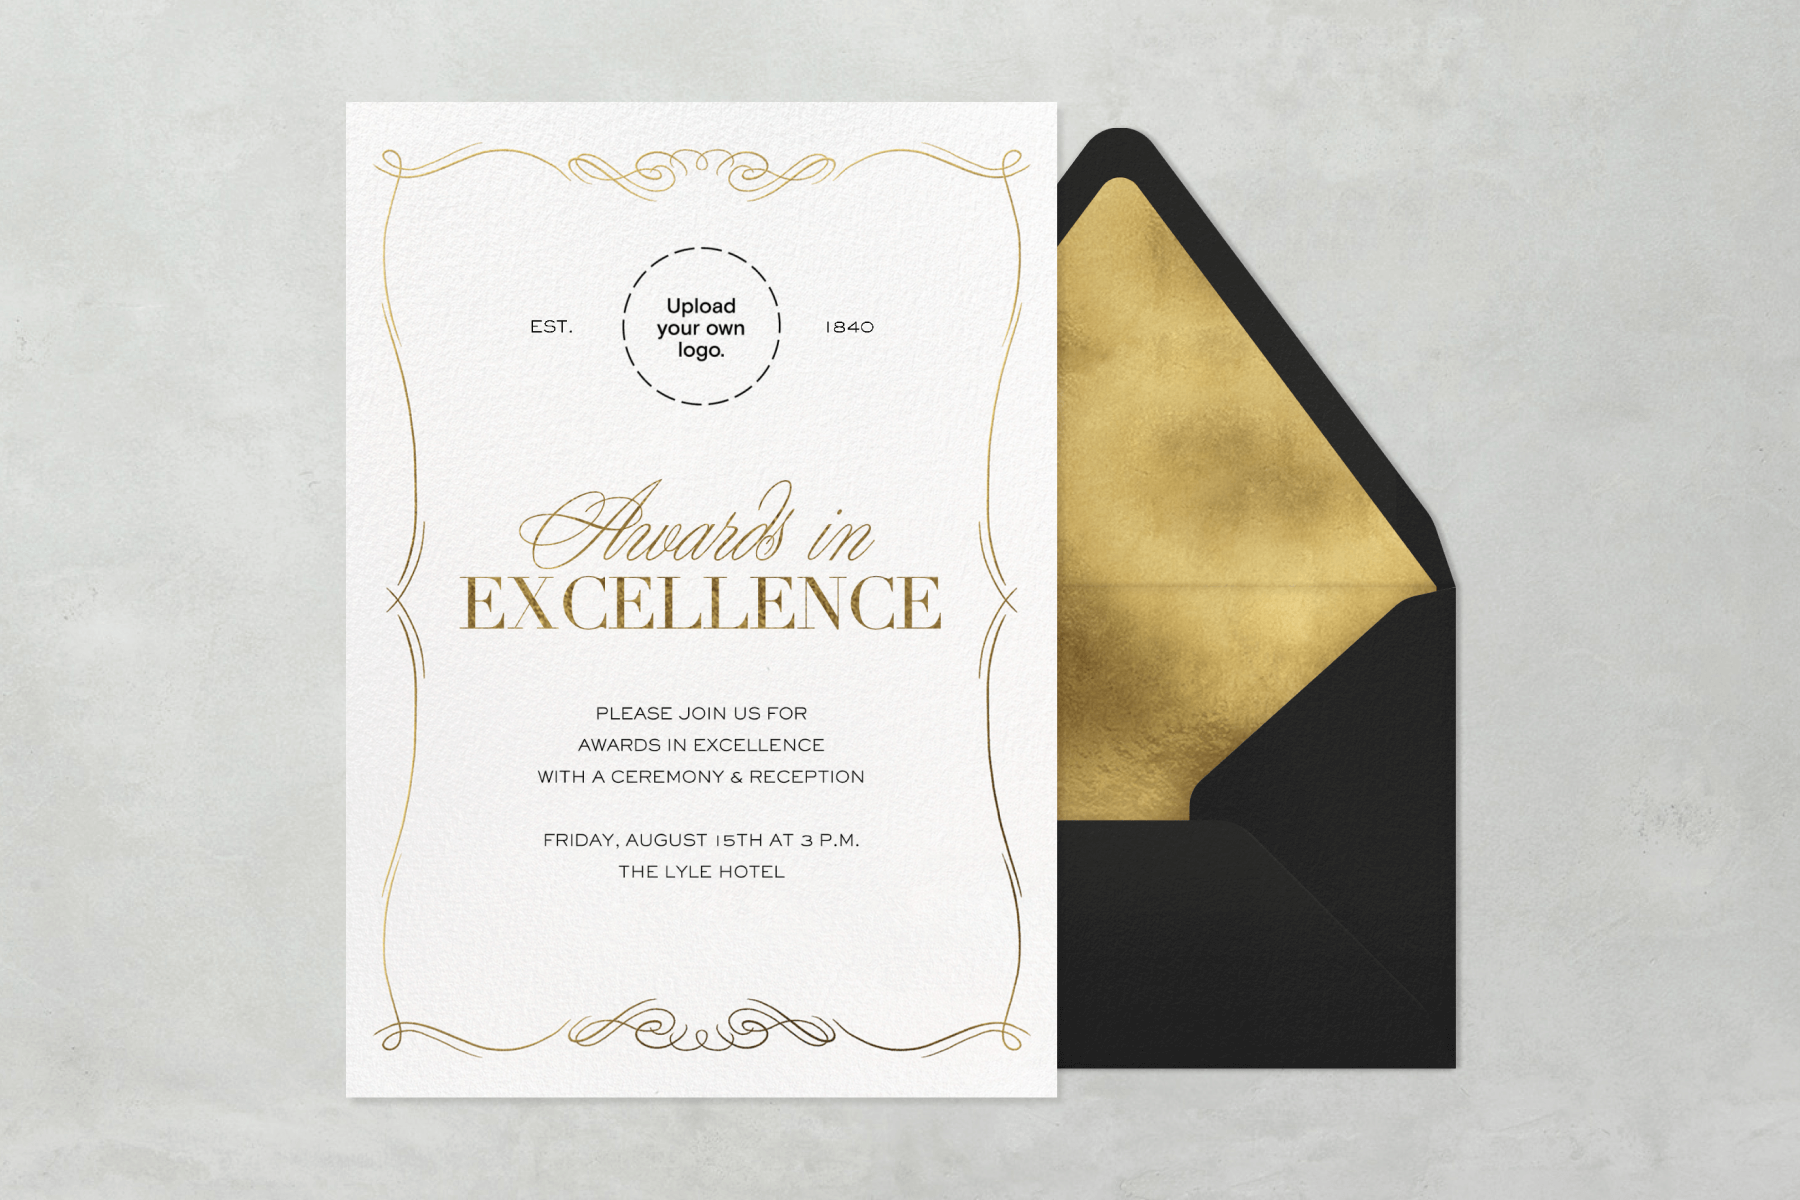 An “Awards in excellence” invitation with a delicate gold scroll around the border beside a black envelope with gold liner.